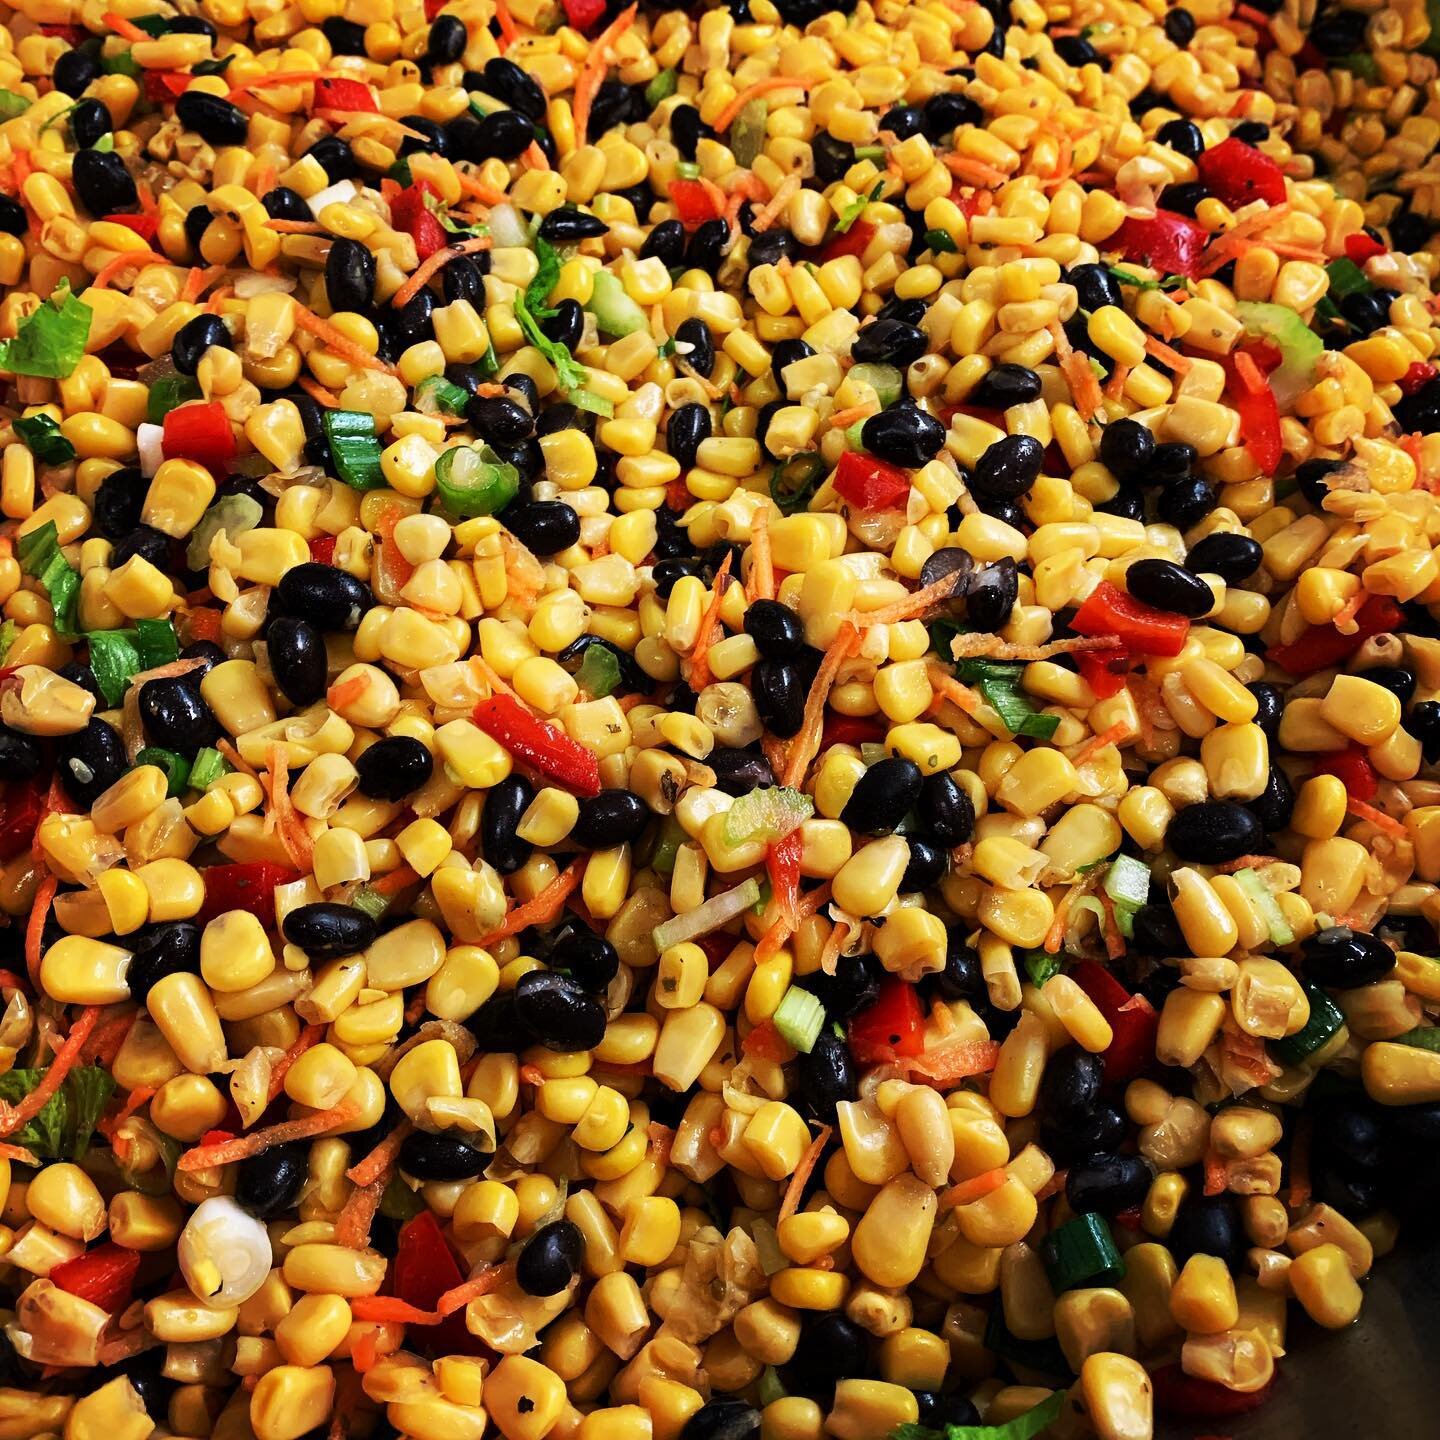 Whole food nourishment for our students is important so we take the time to prep fresh ingredients and cook from scratch as much as possible-fresh corn salad and toppings heading out tomorrow with our homemade nacho (sauce) lunch-homemade banana choc